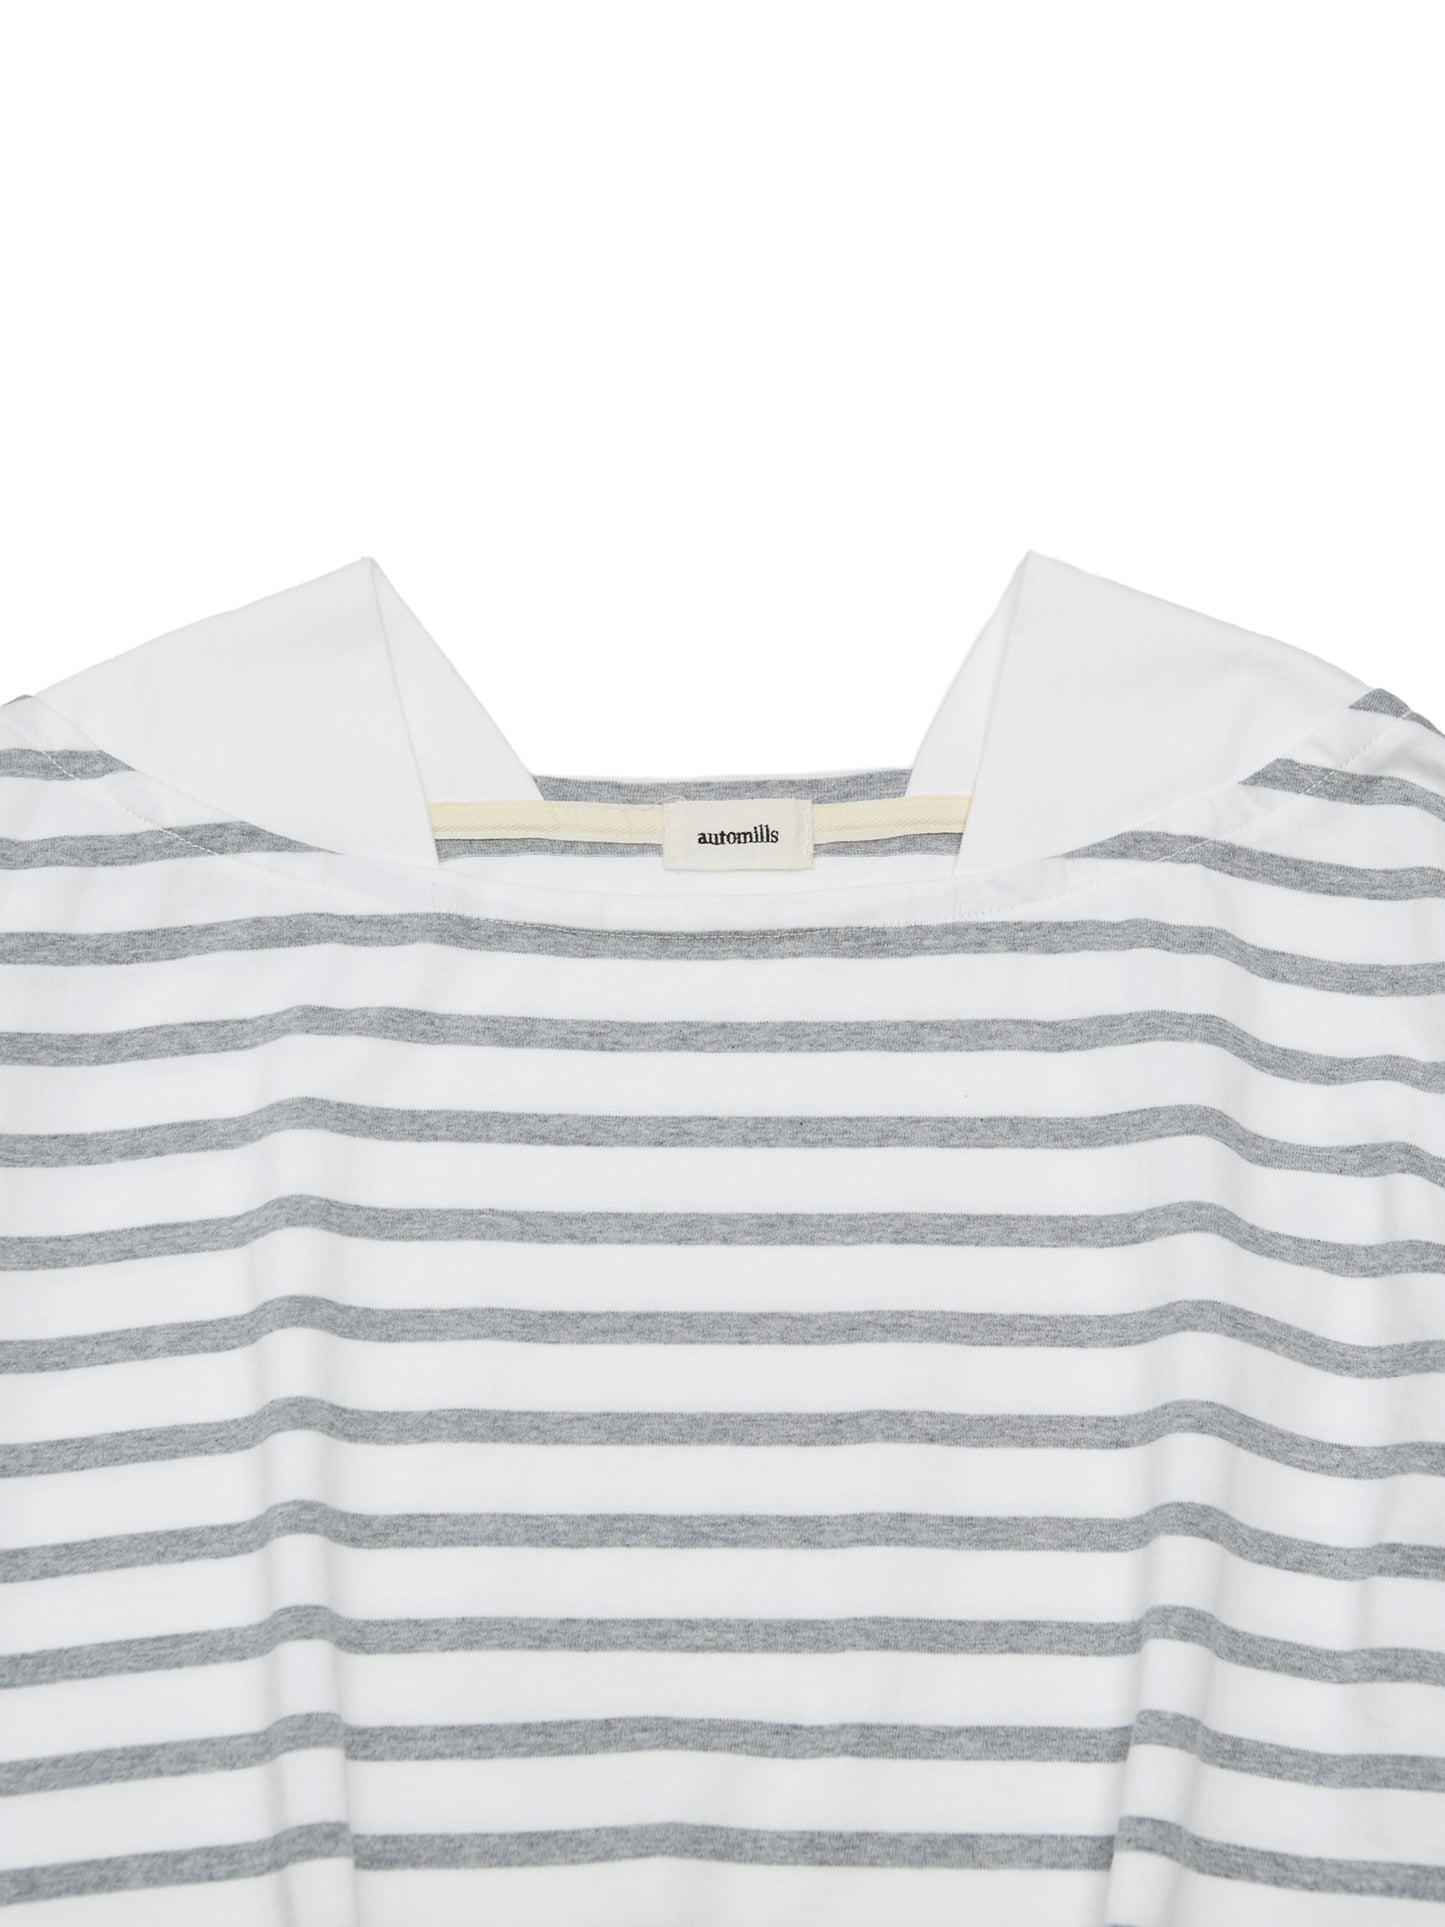 BAGGY BOAT S/S TEE COTTON BORDER JERSEY AM-C0202 White/Gray